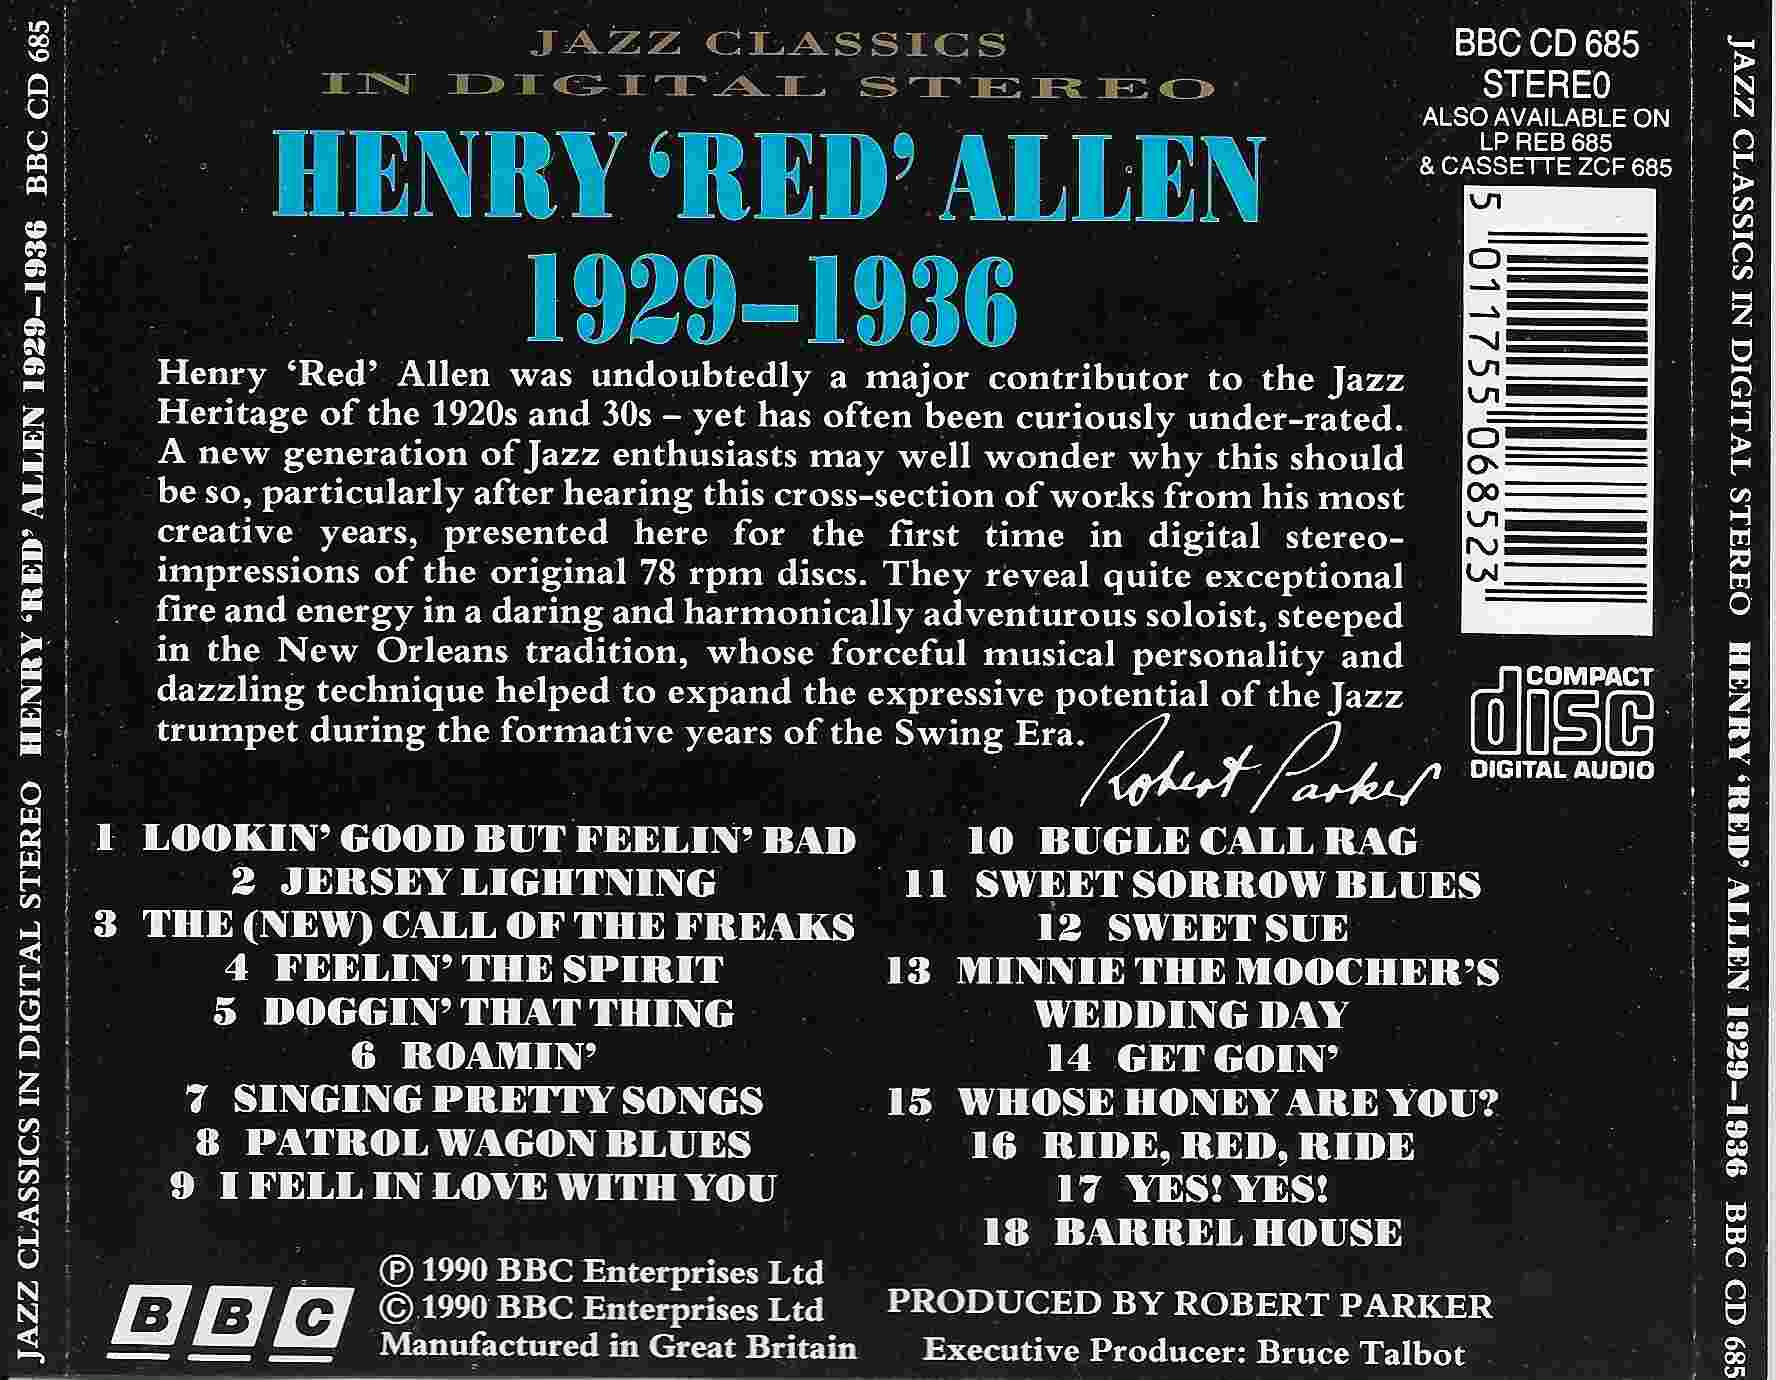 Picture of BBCCD685 Jazz classics - Henry 'Red' Allen by artist Henry 'Red' Allen from the BBC records and Tapes library